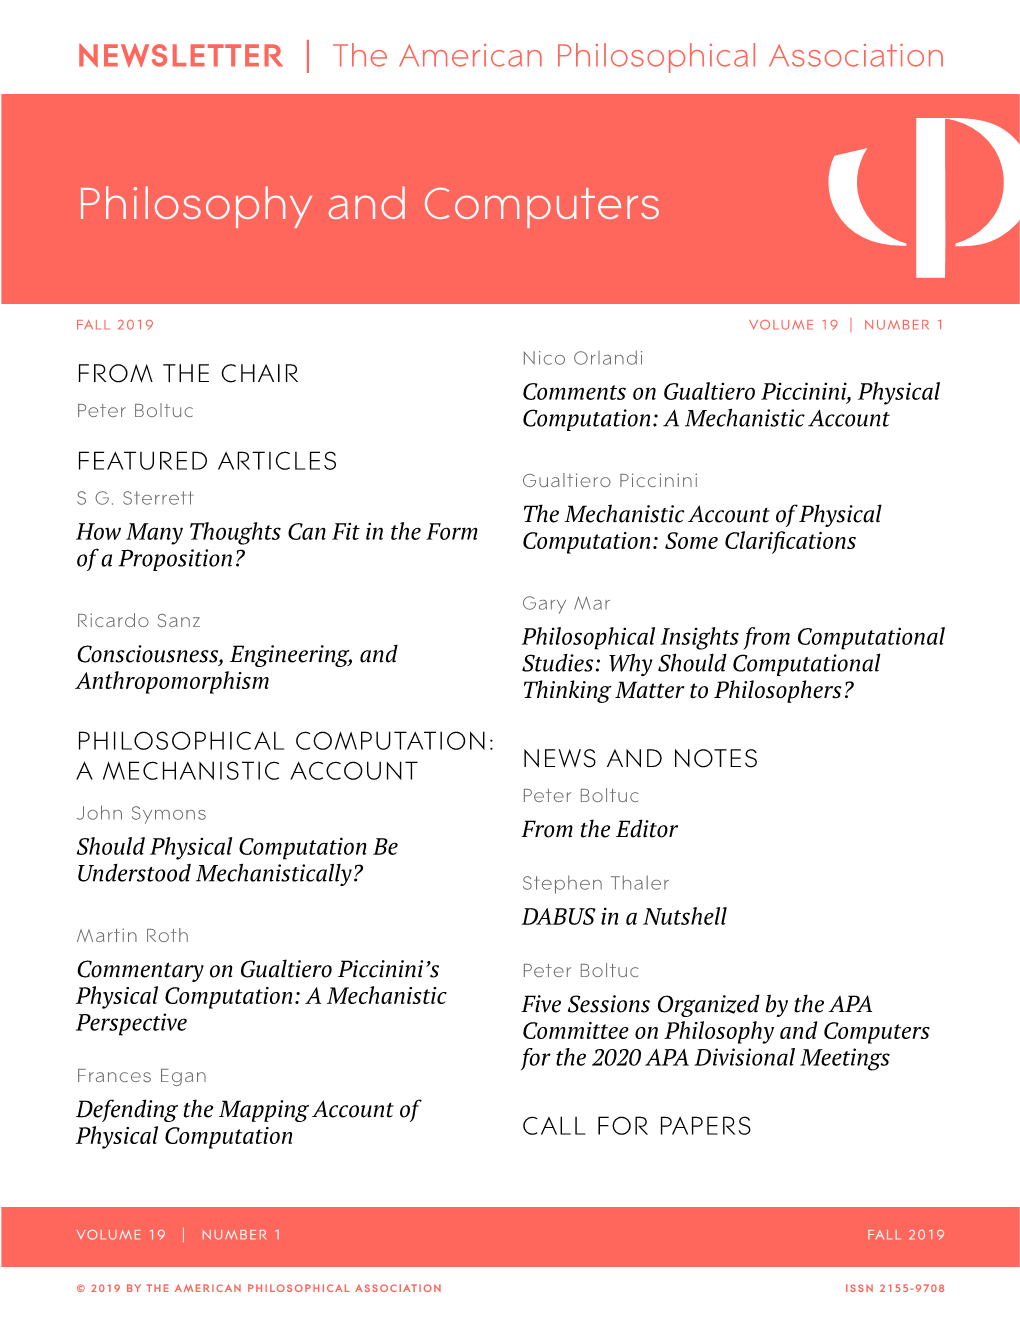 APA Newsletter on Philosophy and Computers, Vol. 19, No. 1 (Fall 2019)